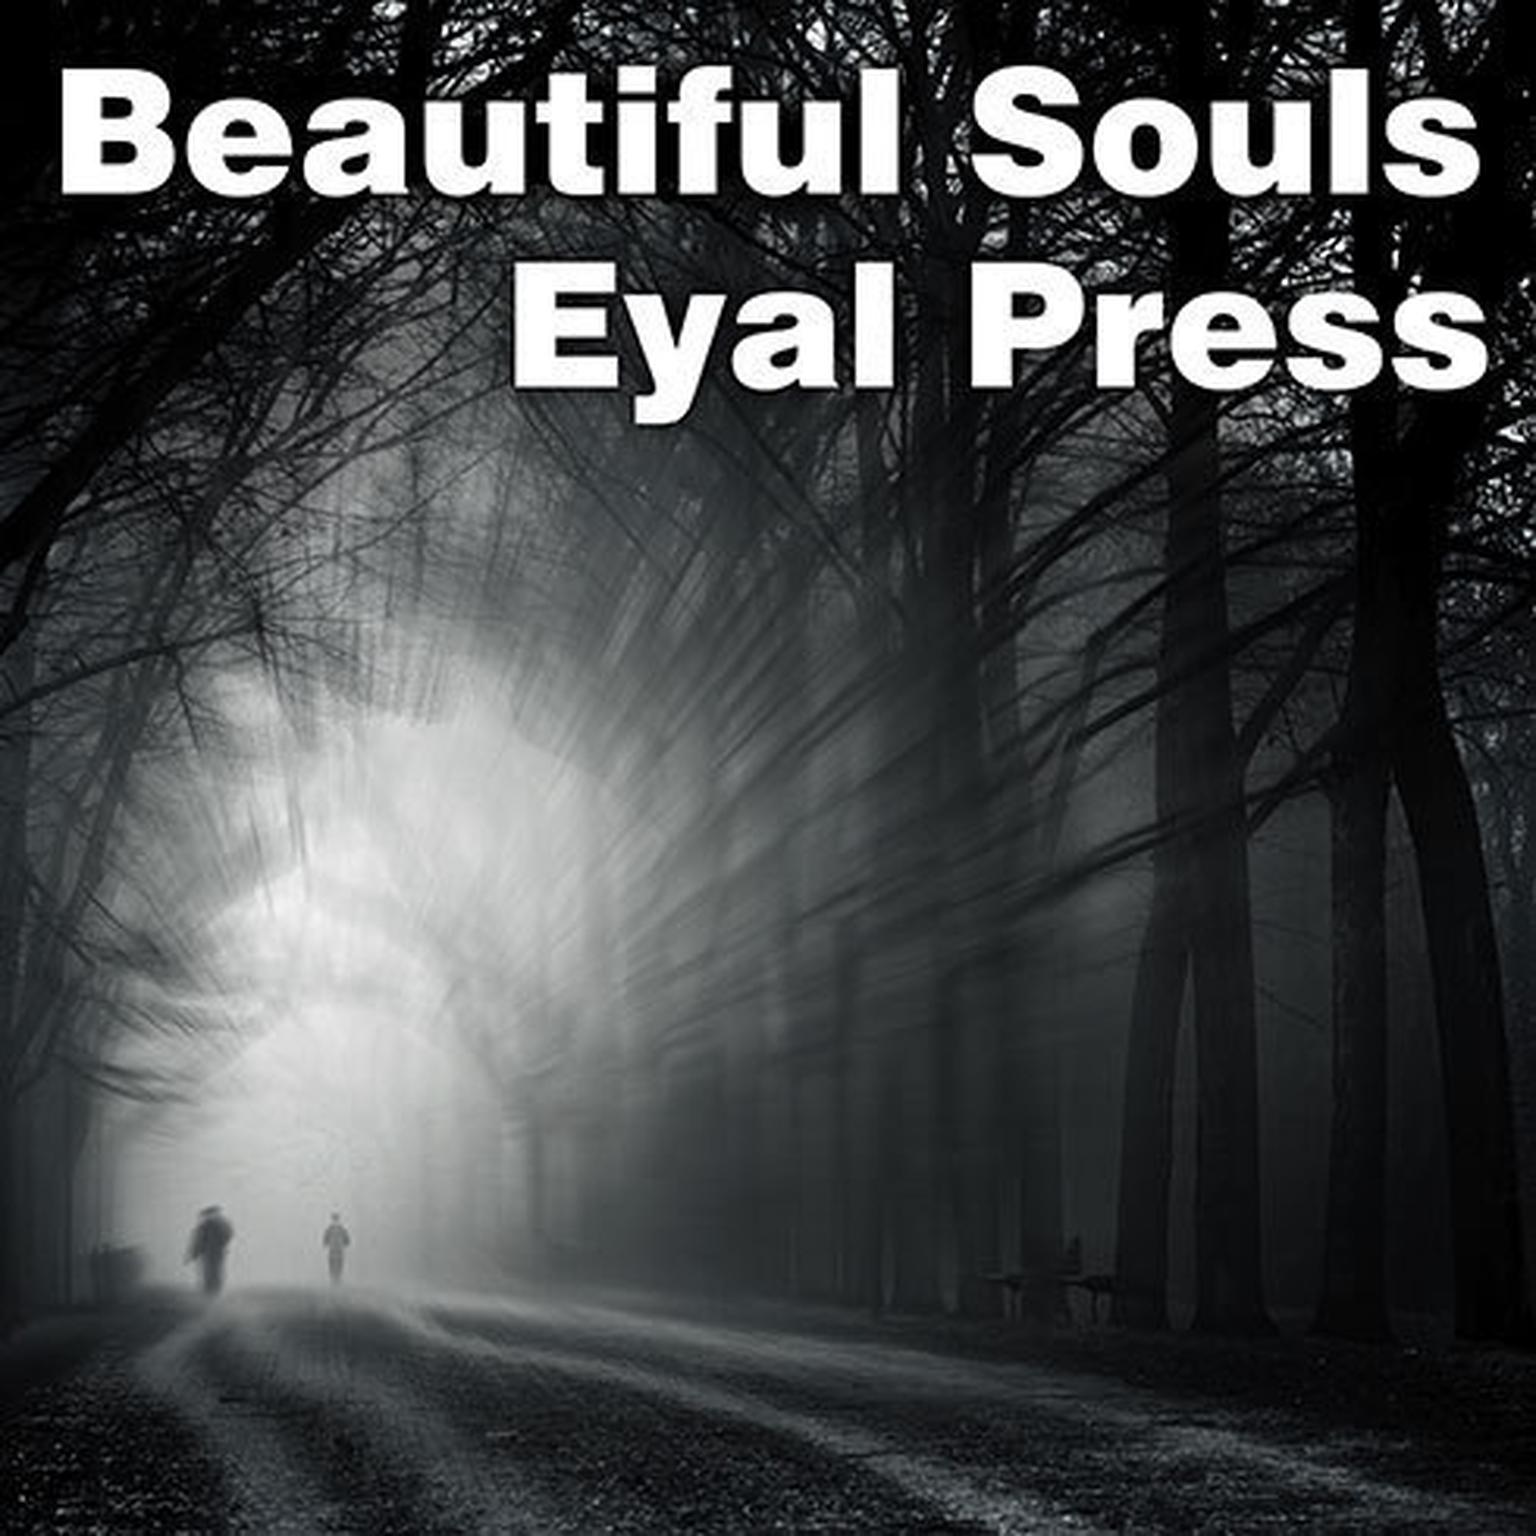 Beautiful Souls: Saying No, Breaking Ranks, and Heeding the Voice of Conscience in Dark Times Audiobook, by Eyal Press